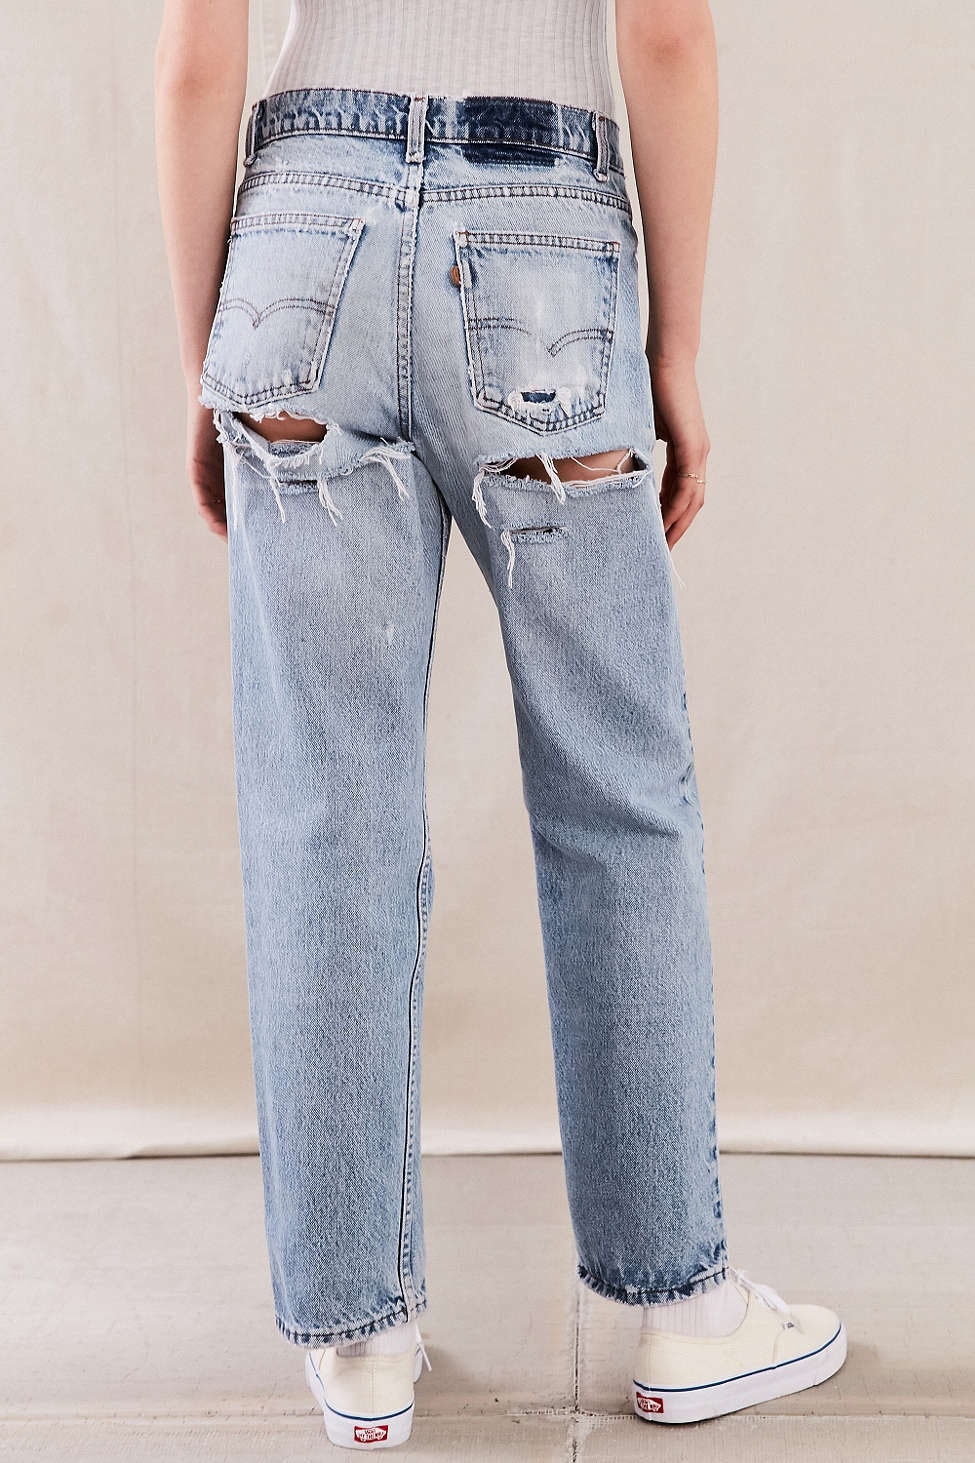 jeans that are ripped in the back